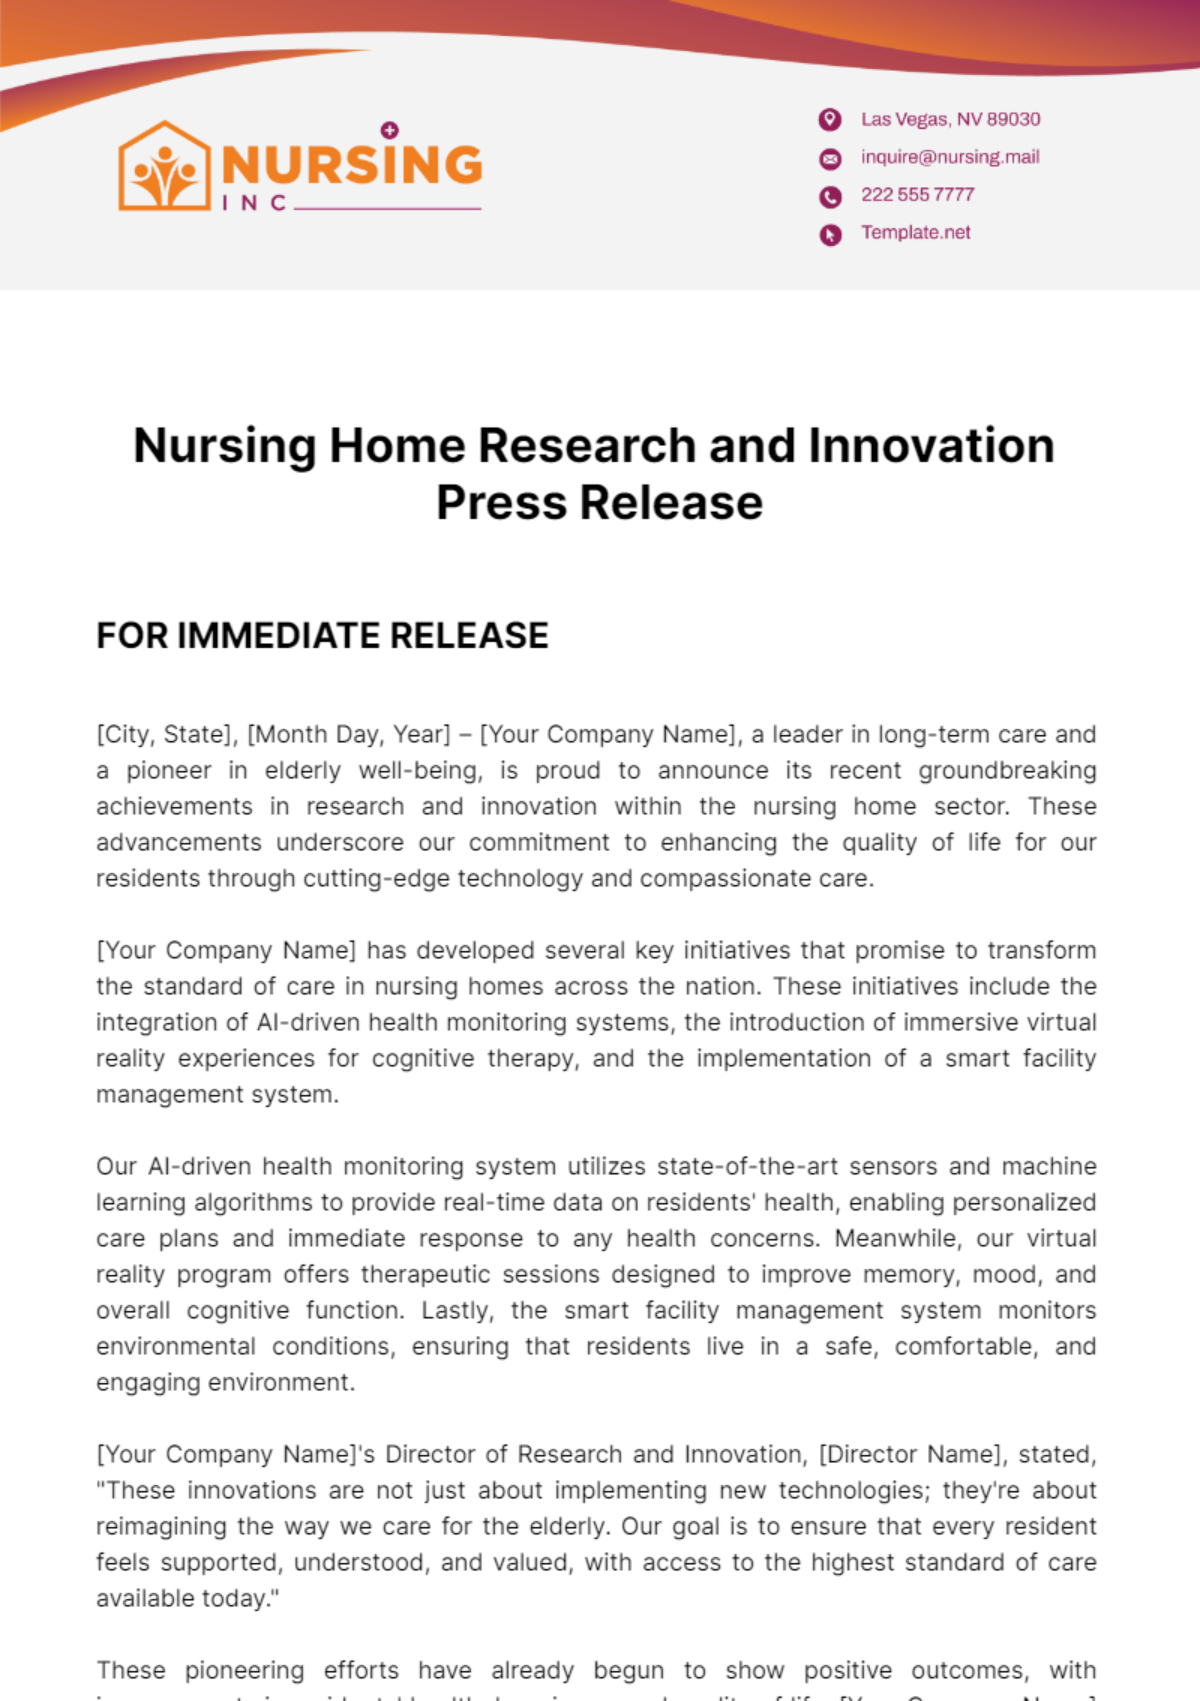 Nursing Home Research and Innovation Press Release Template